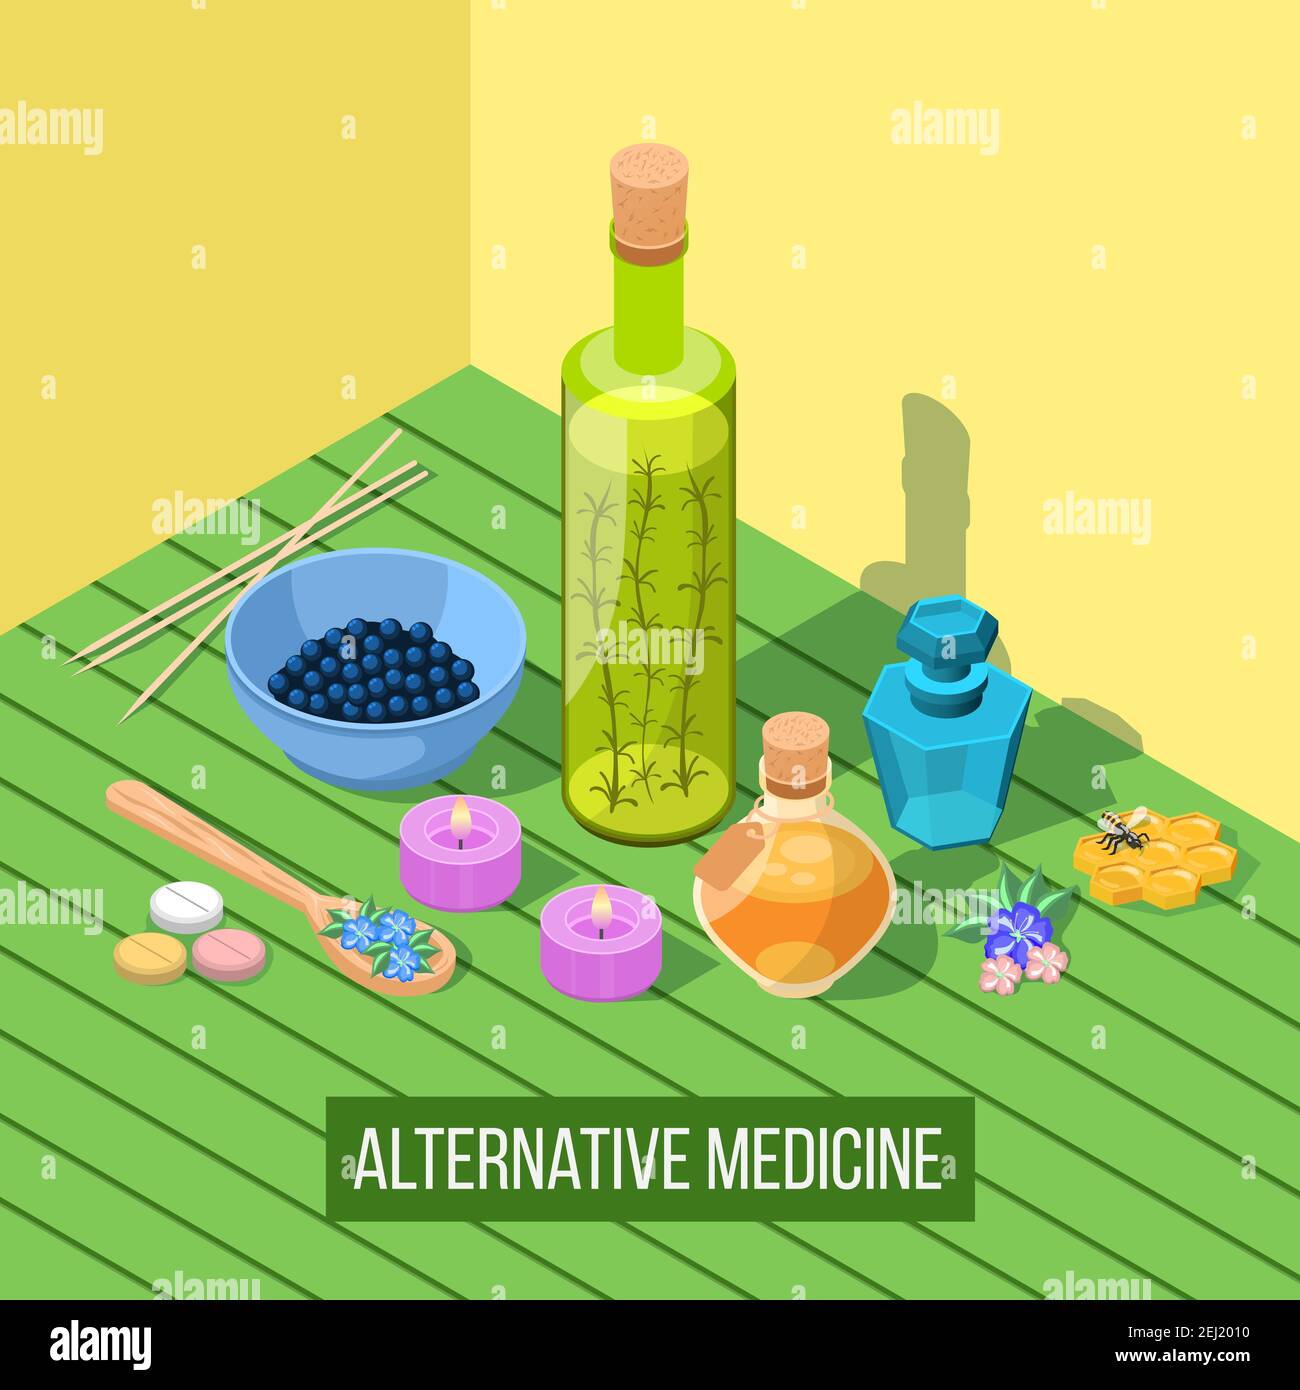 Alternative medicine isometric composition with elements of homeopathy apitherapy acupuncture phytotherapy aromatherapy  healing vector illustration Stock Vector